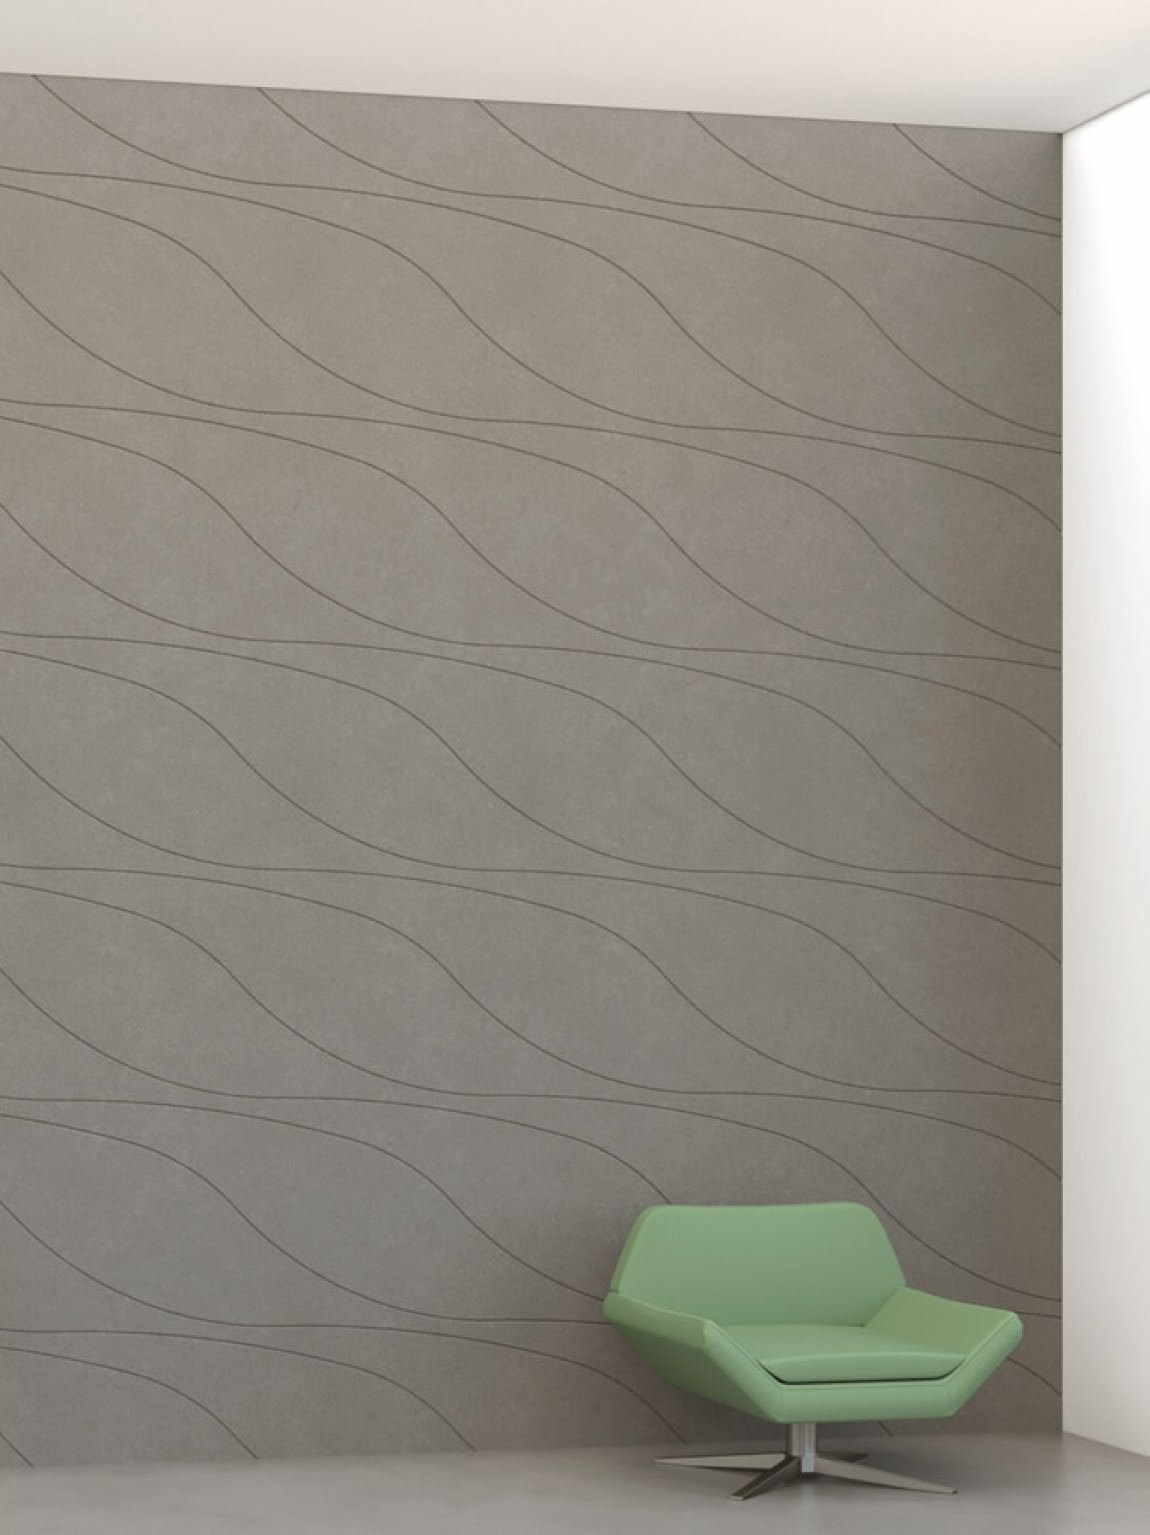 Sound Absorbent Acoustic Wall Tiles 8 Pack